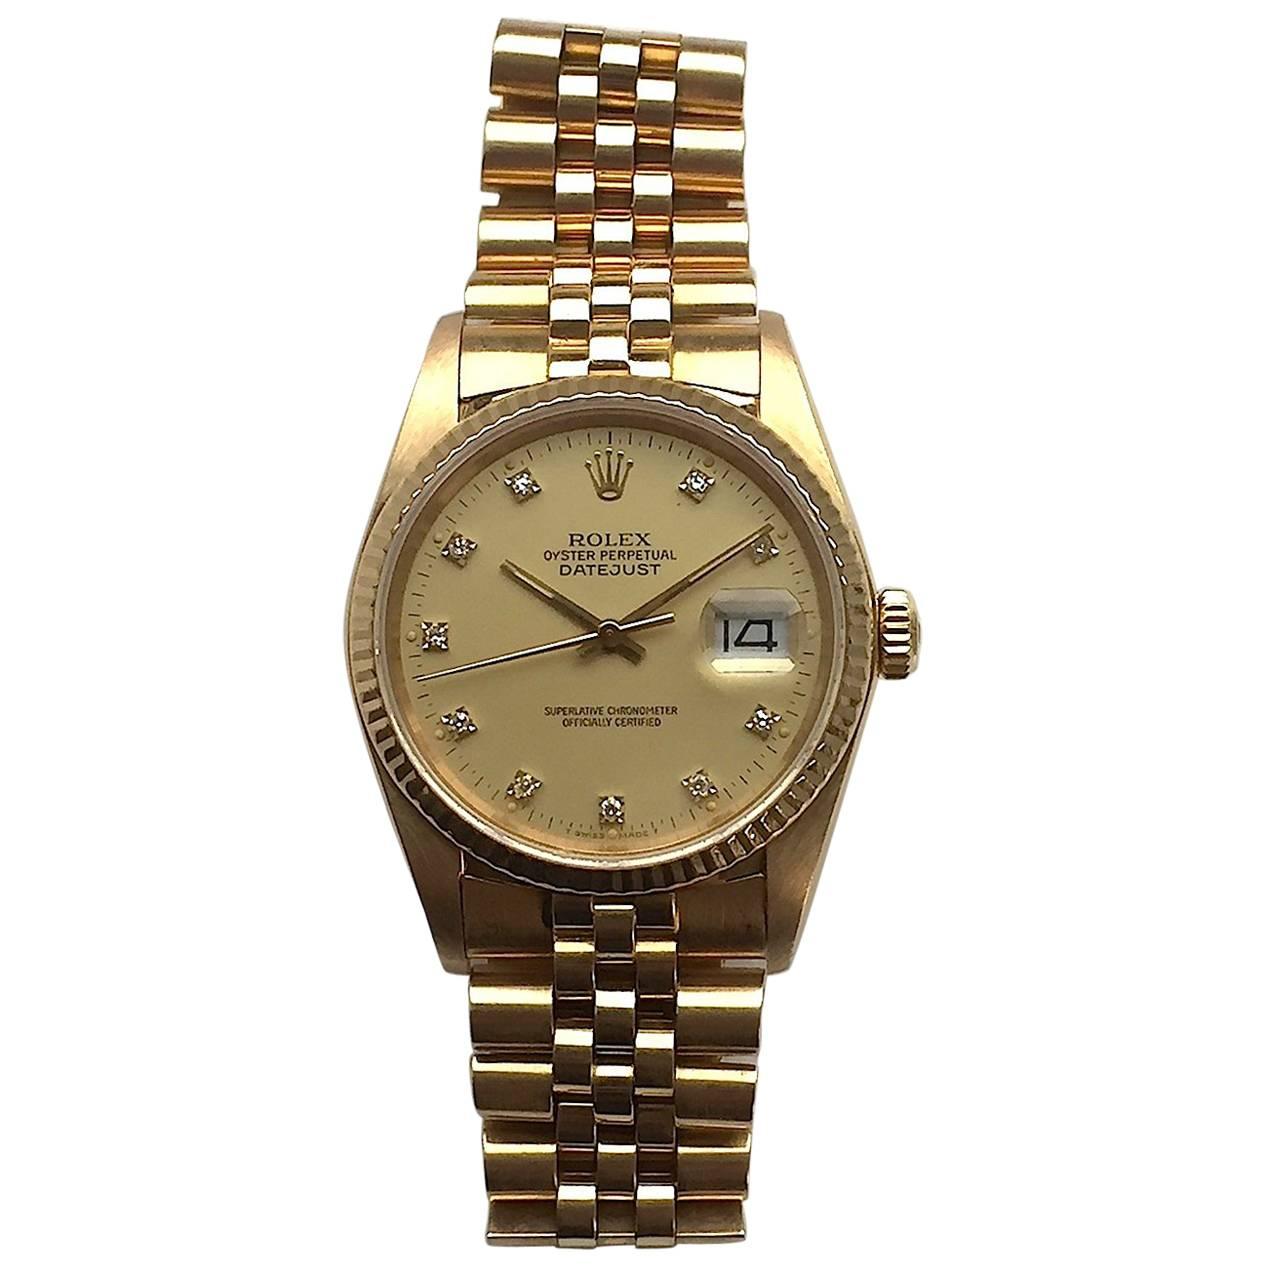 Rolex Yellow Gold Diamond Dial Oyster Perpetual Datejust Automatic Wristwatch